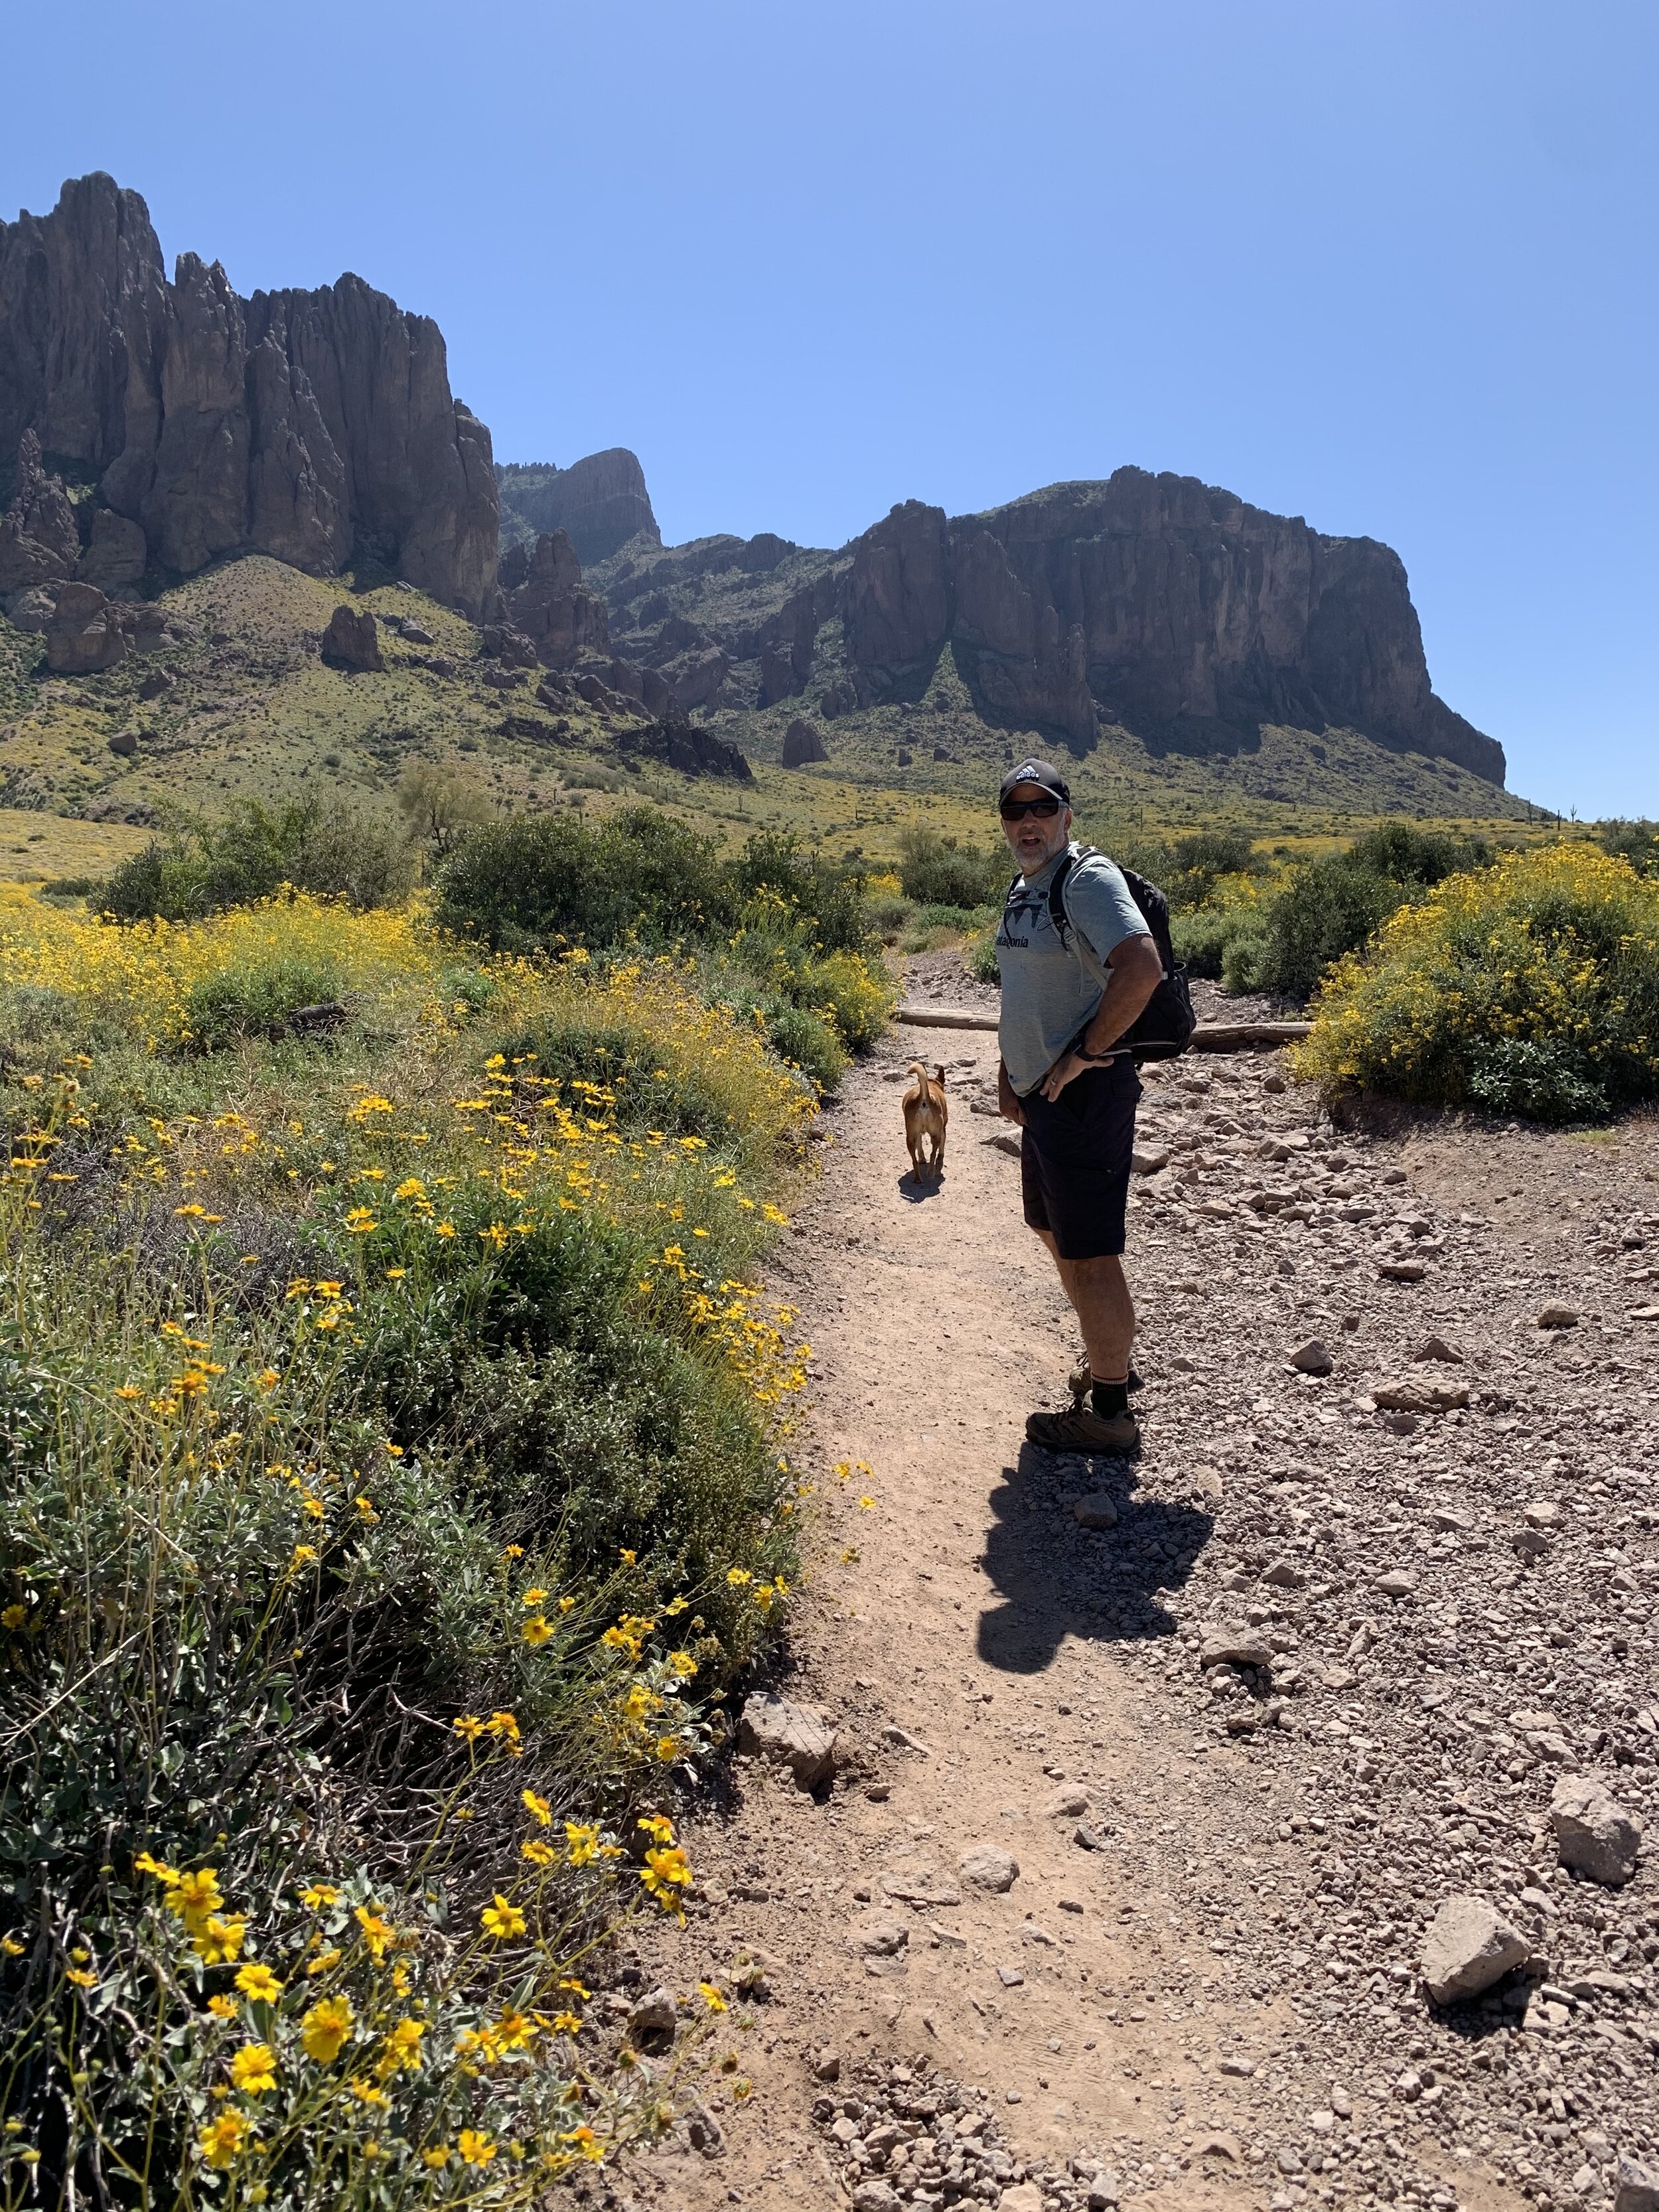  Setting out for an adventurous and challenging day of hiking the Tonto National Forest. We were glad Clay was able to hike all of the trails in this area. 